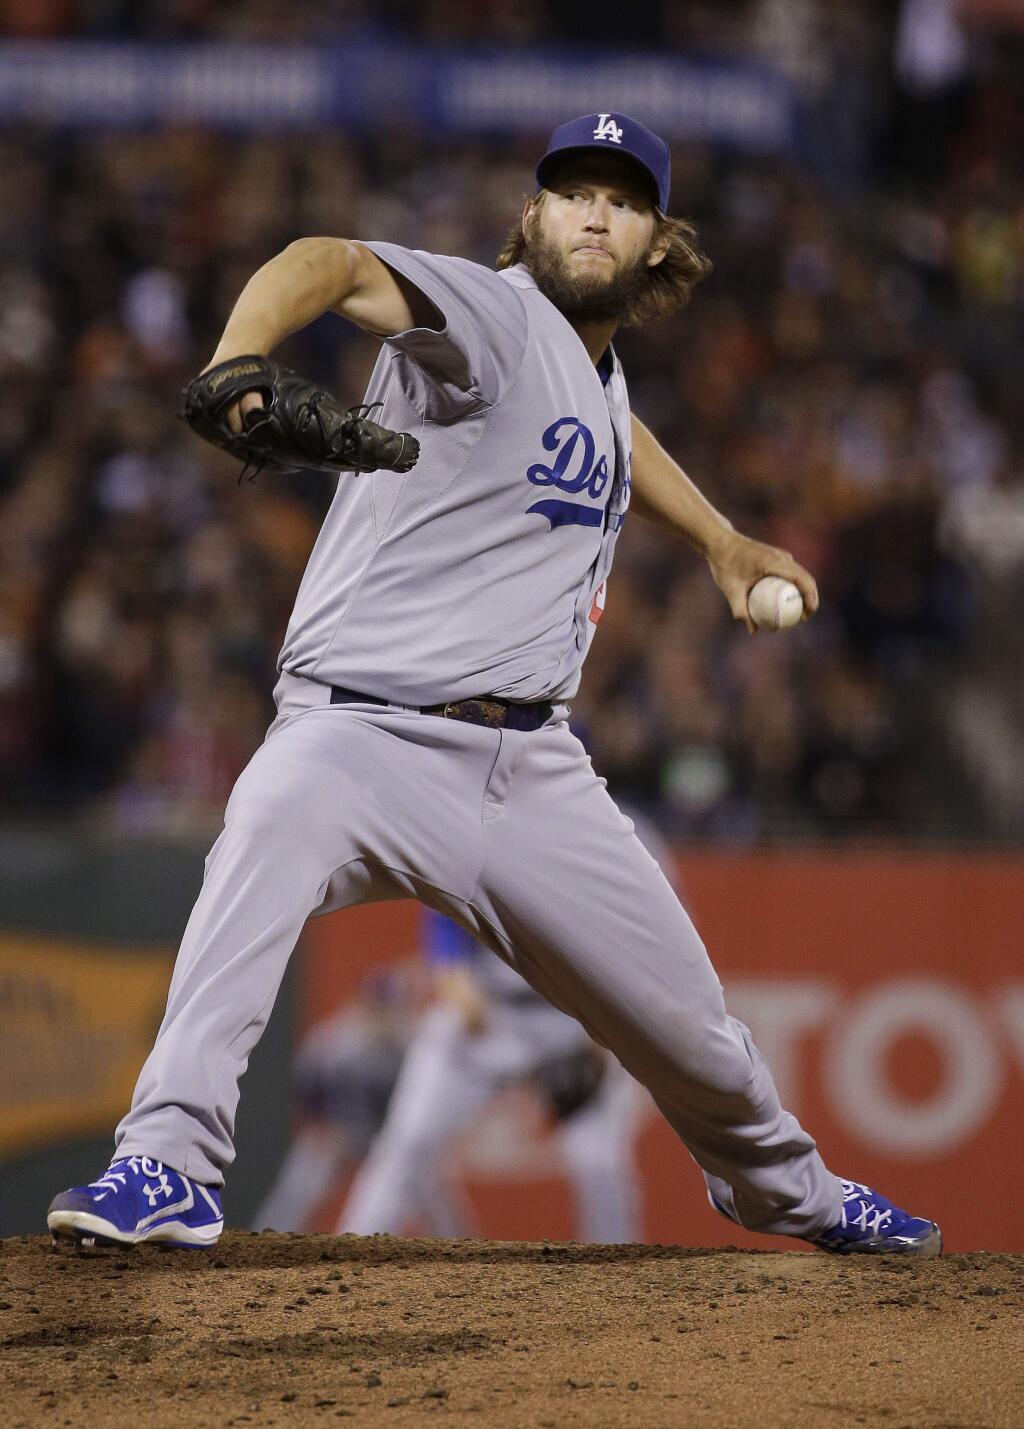 Los Angeles Dodgers pitcher Clayton Kershaw throws against the San Francisco Giants during the fourth inning of a baseball game in San Francisco, Tuesday, Sept. 29, 2015. (AP Photo/Jeff Chiu)